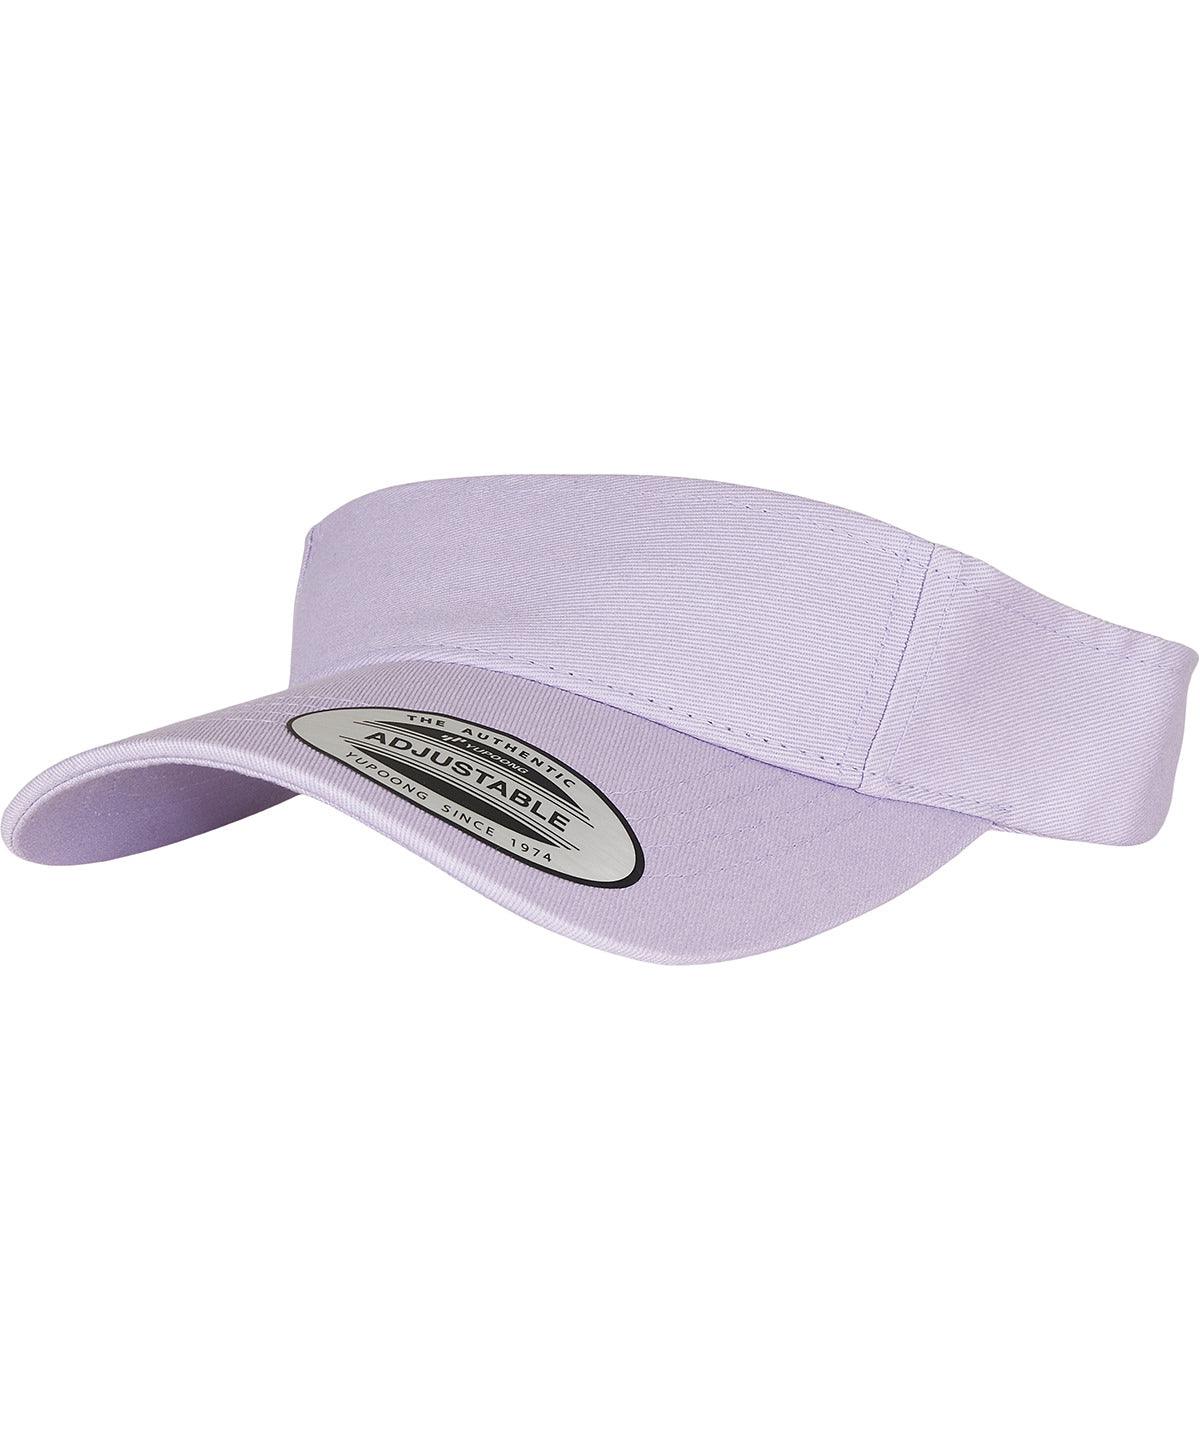 Colours 2022Rebrandable visor HeadwearNew For - Lilac (8888) Flexfit Yupoong Curved by cap